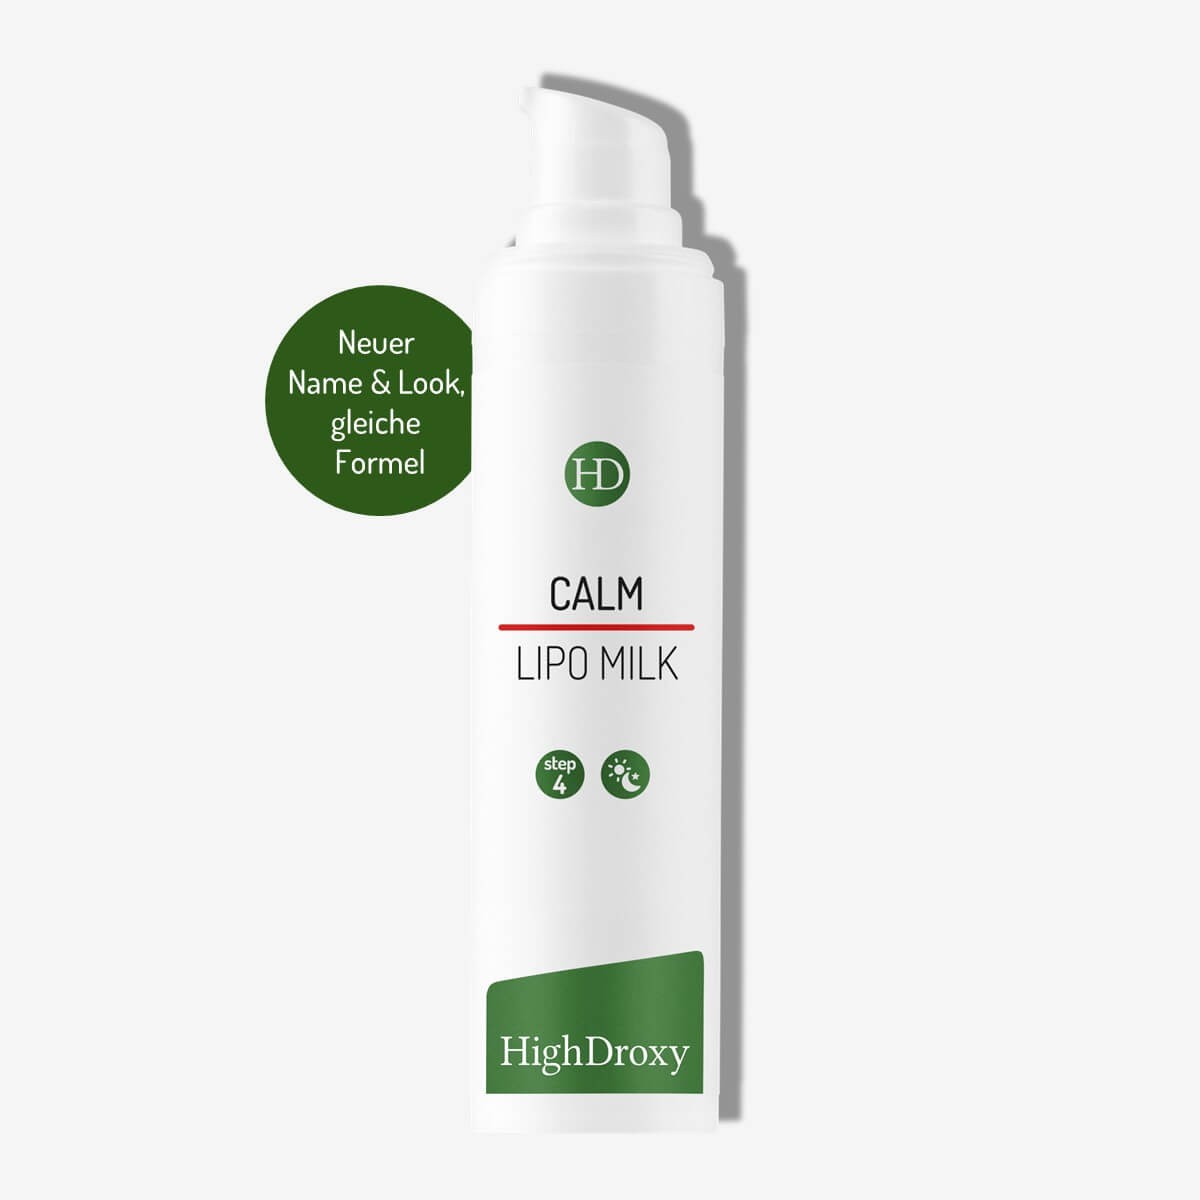 Bottle of Calm Lipo Milk from HighDroxy against gray background.